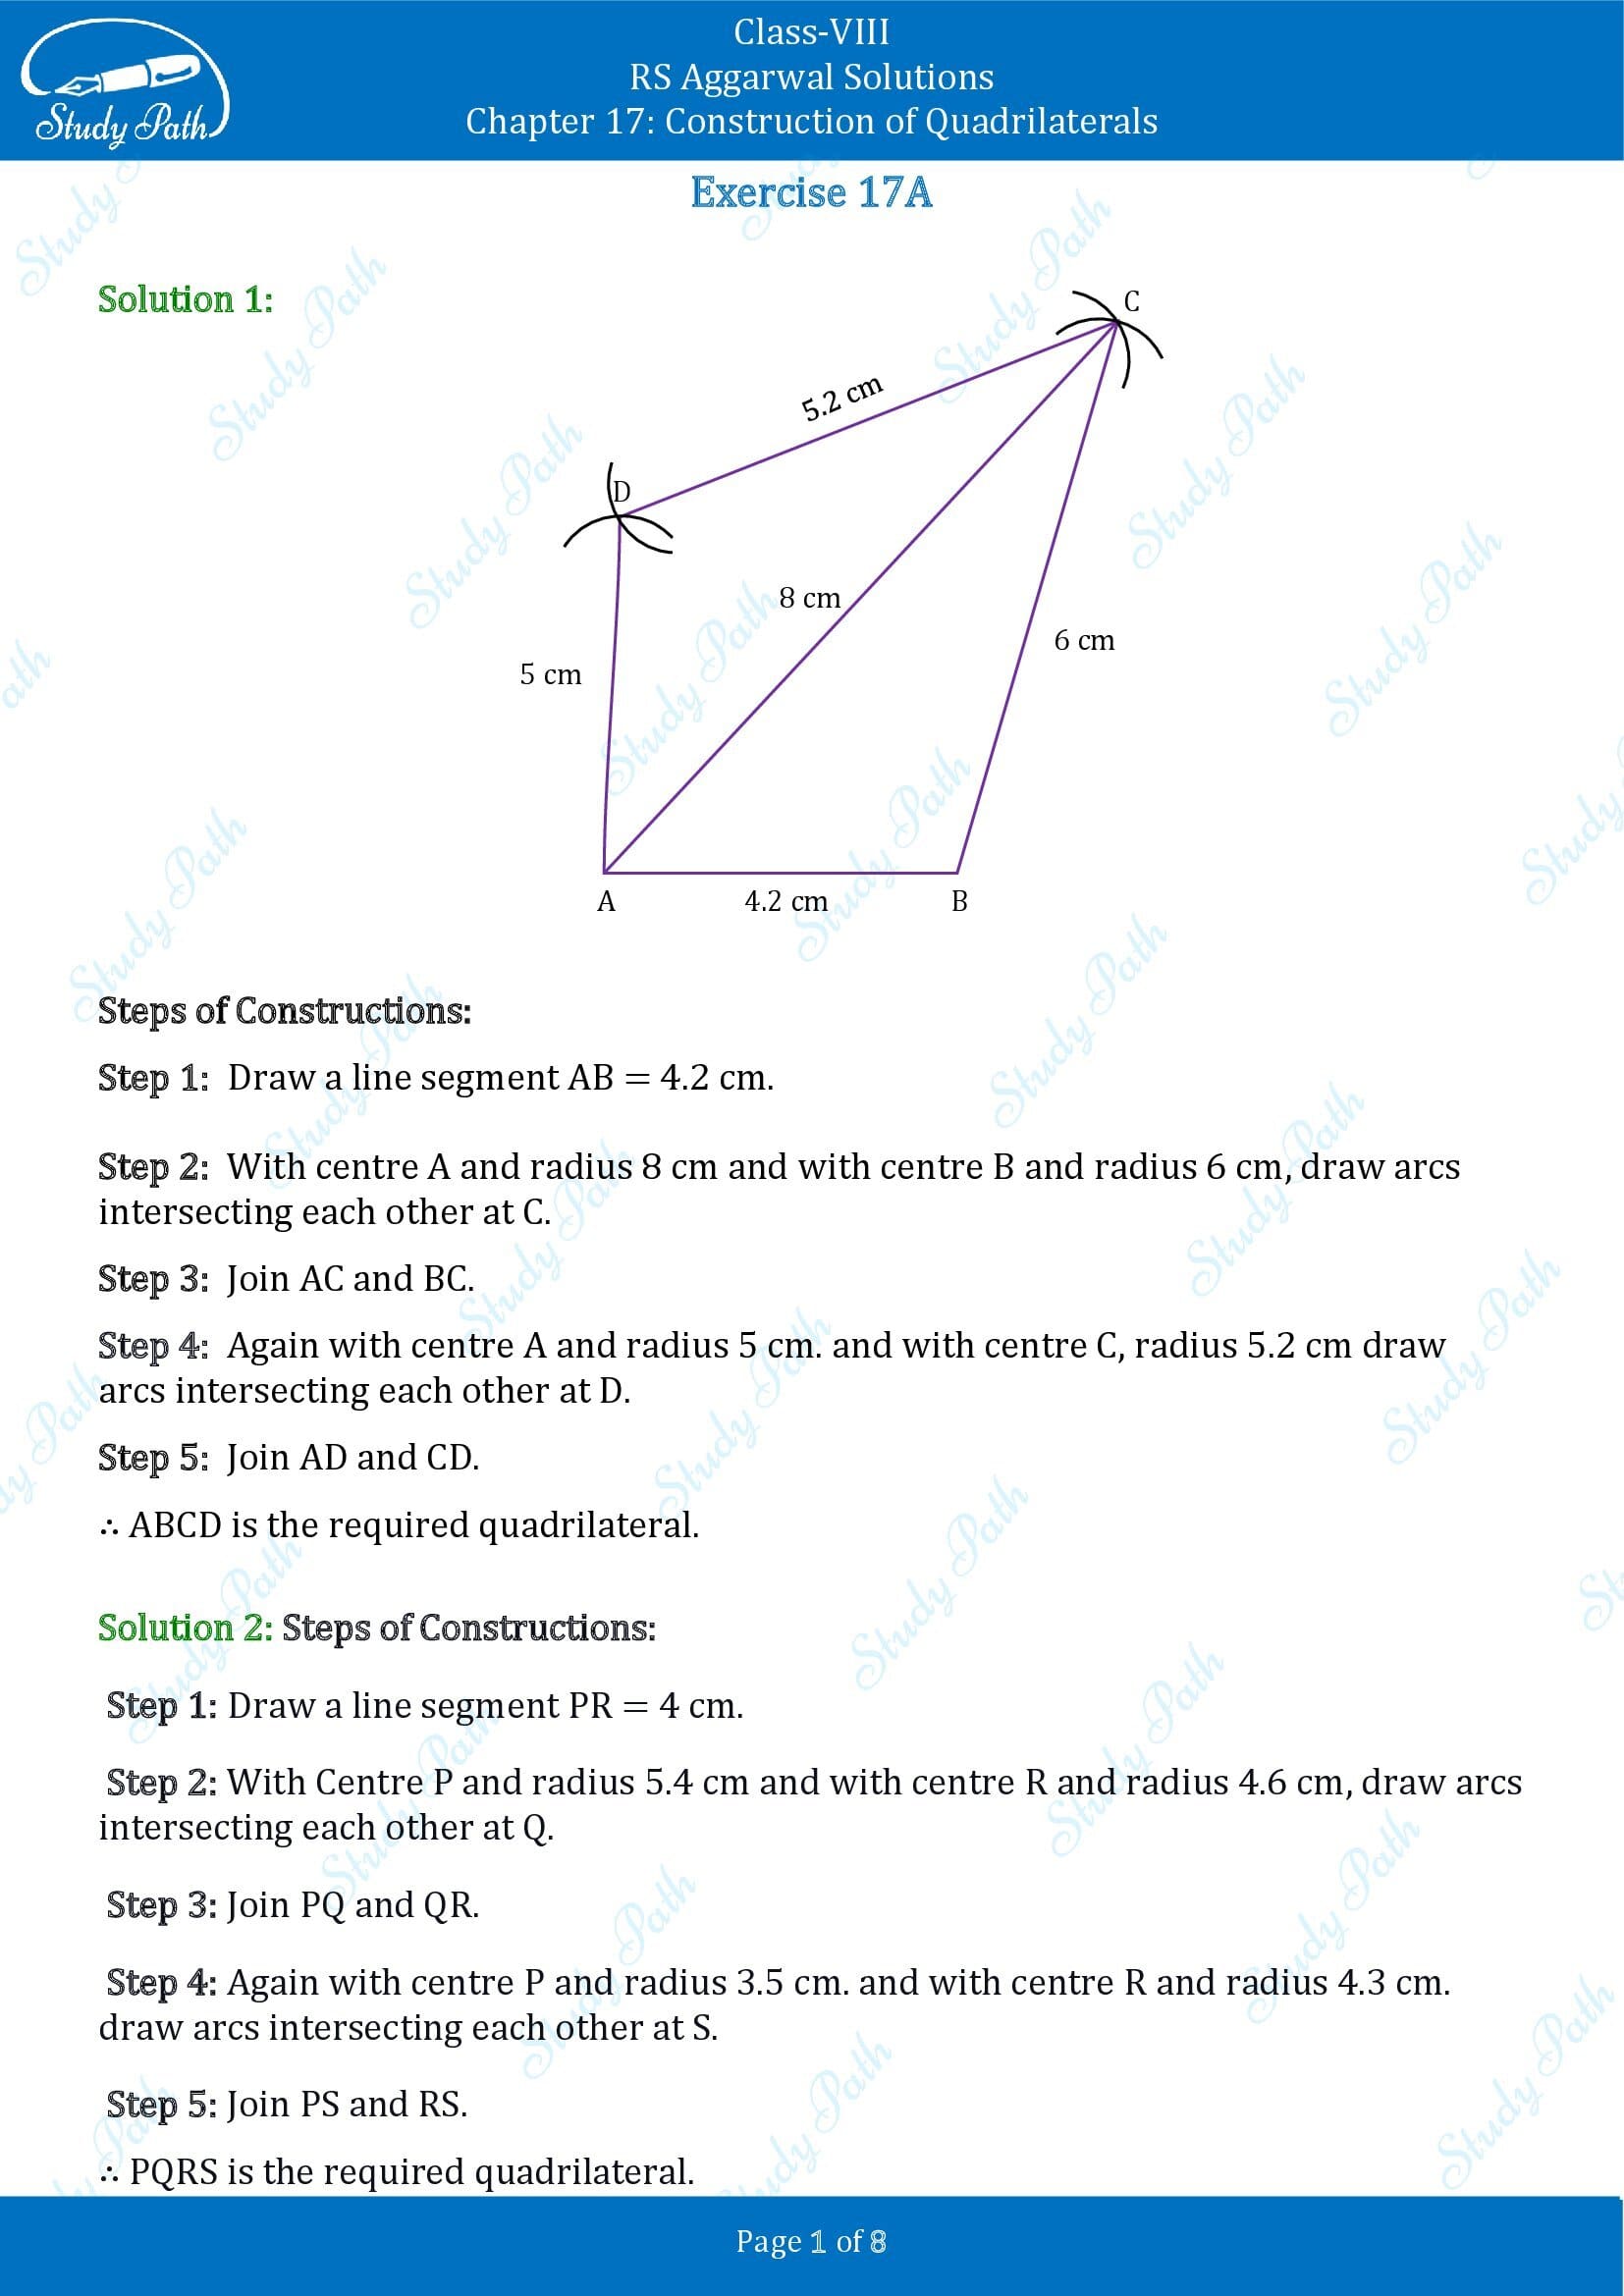 RS Aggarwal Solutions Class 8 Chapter 17 Construction of Quadrilaterals Exercise 17A 00001